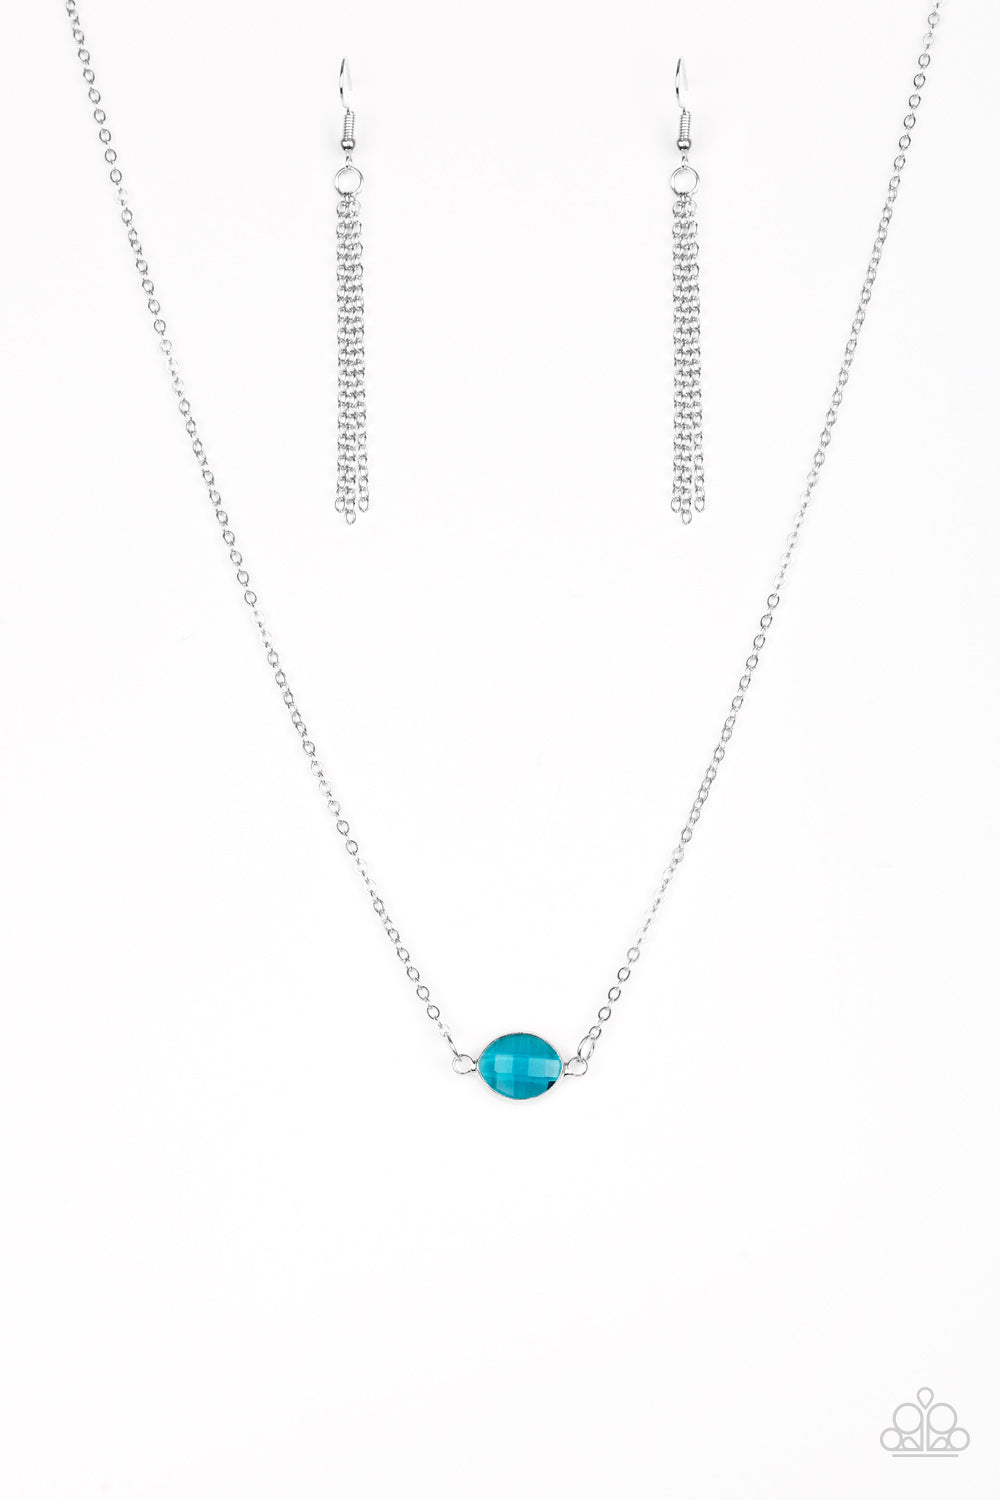 A regal marquise style cut, a glassy blue gem attaches to two shimmery silver chains